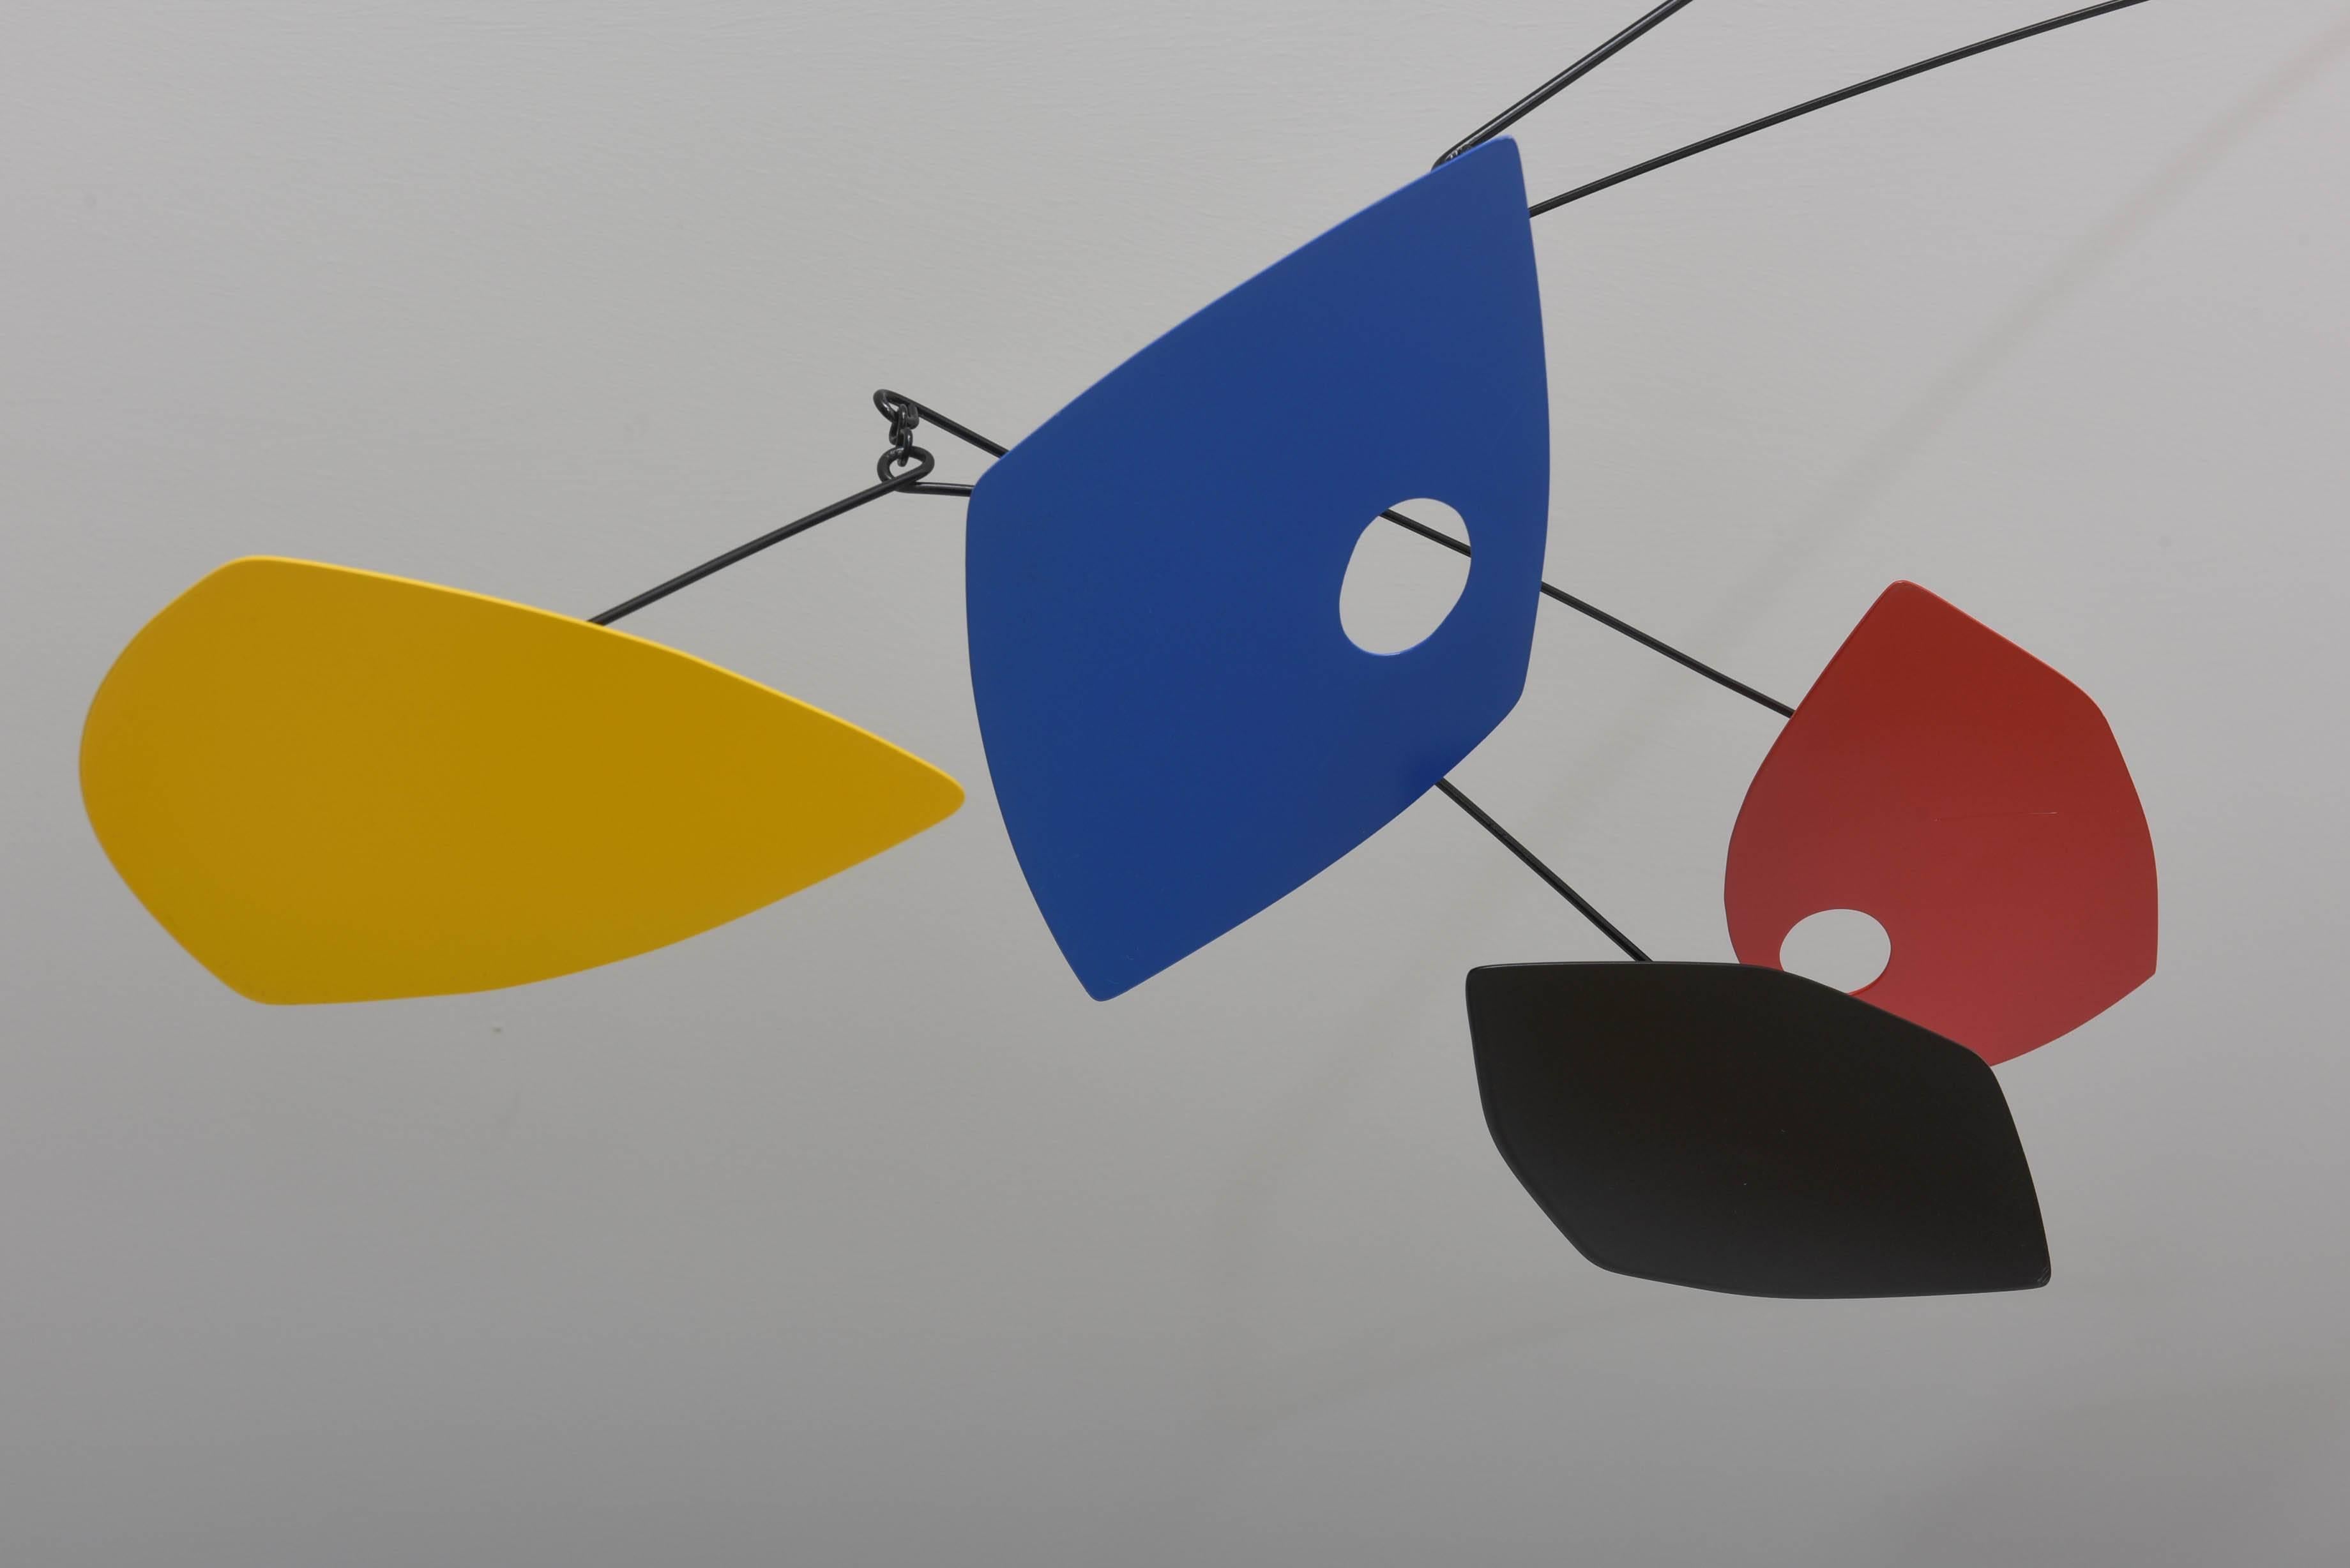 Powder-Coated Multi-Colored Mobile in the Manner of Alexander Calder, American, 20th Century